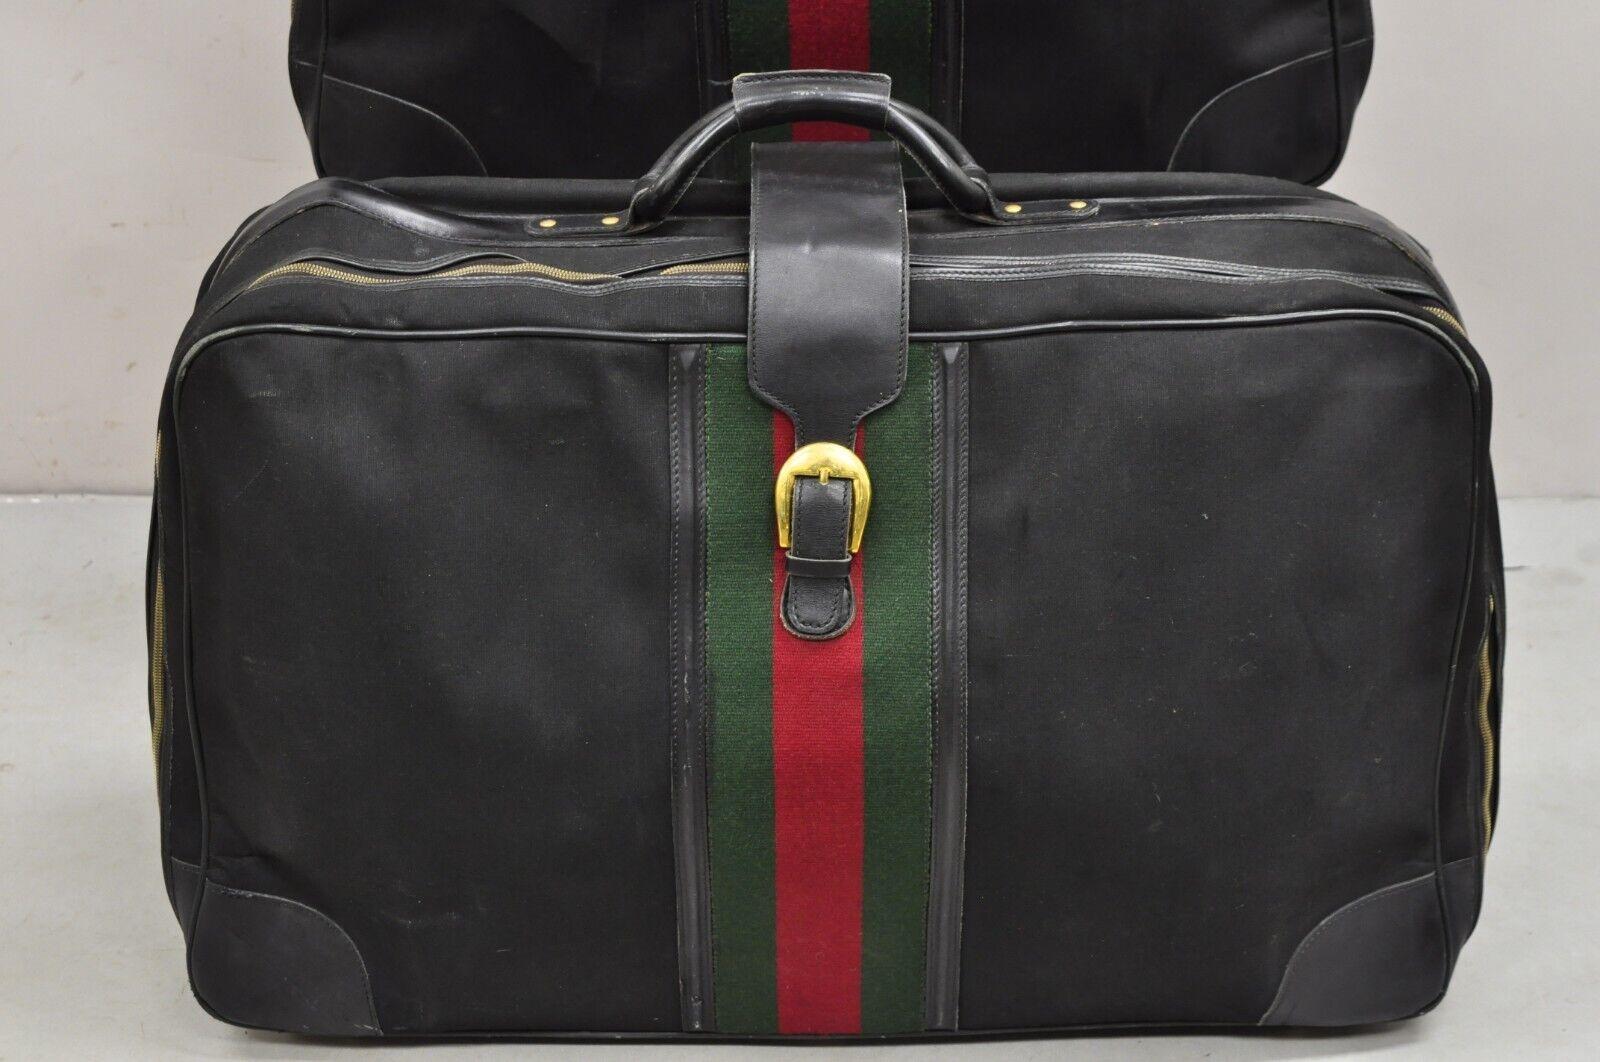 Modern Vintage Gucci Black Canvas and Leather Suitcase Luggage His and Hers Set - 2 Pcs For Sale